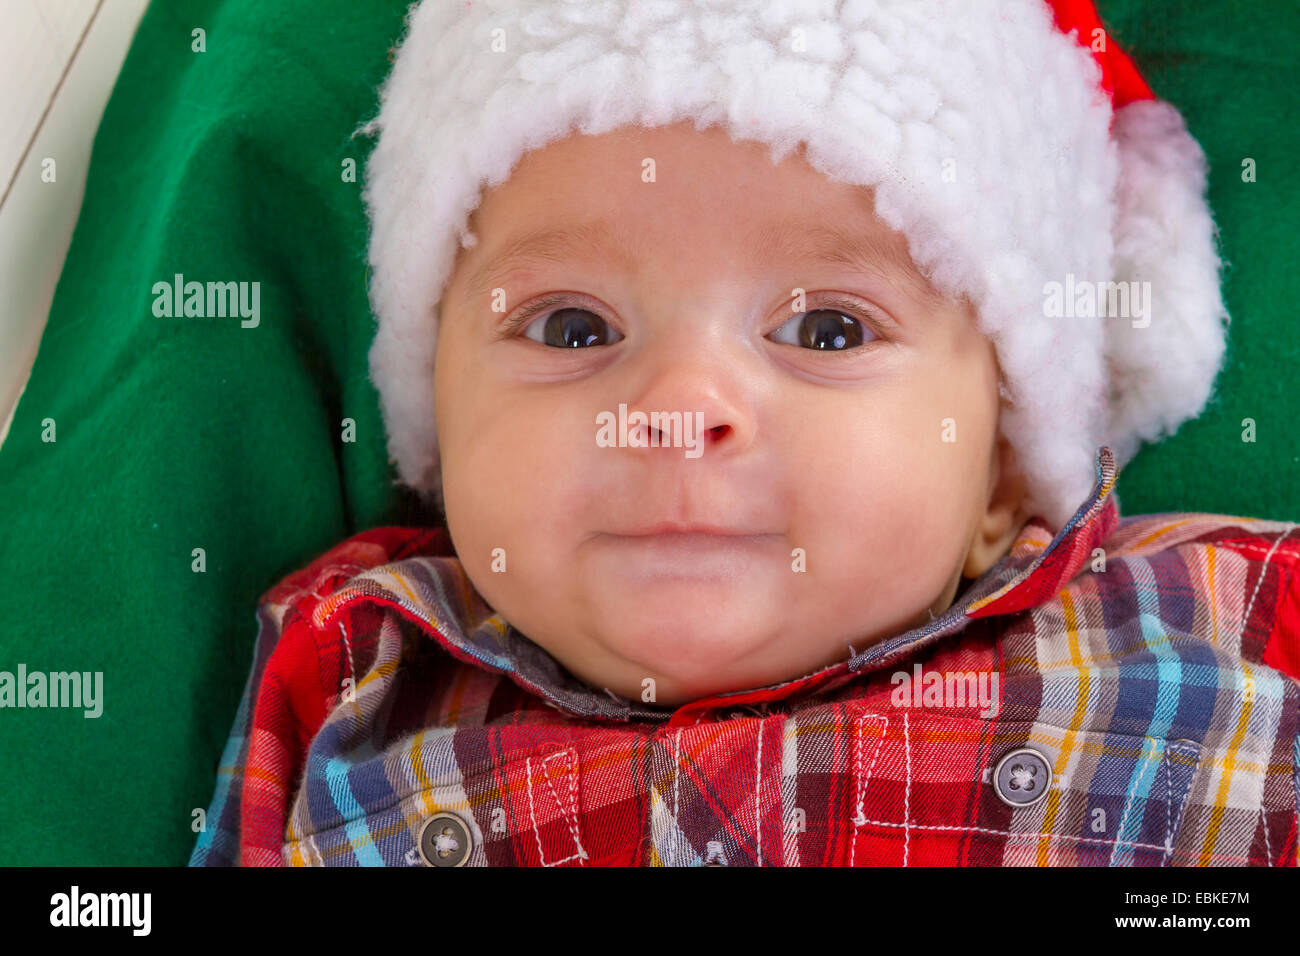 cute baby boy smiling in a santa claus hat close-up Stock Photo